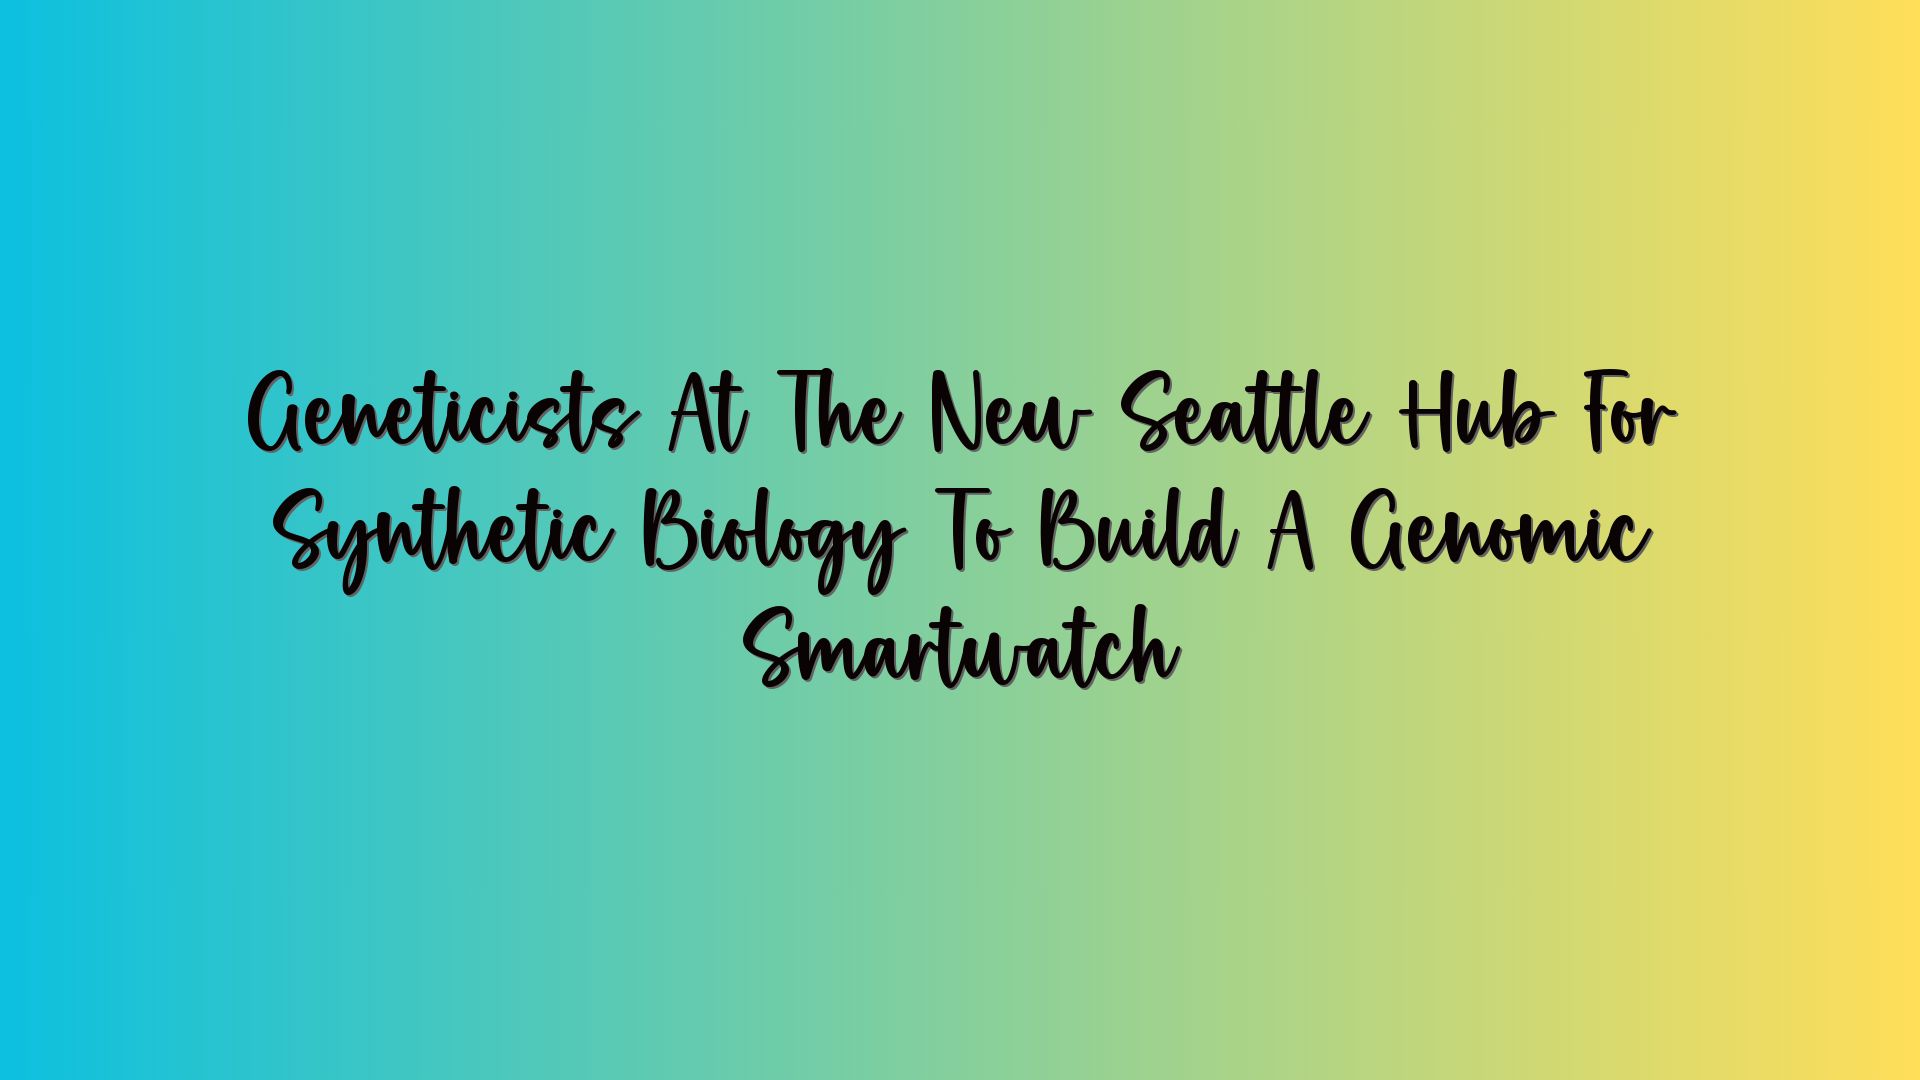 Geneticists At The New Seattle Hub For Synthetic Biology To Build A Genomic Smartwatch